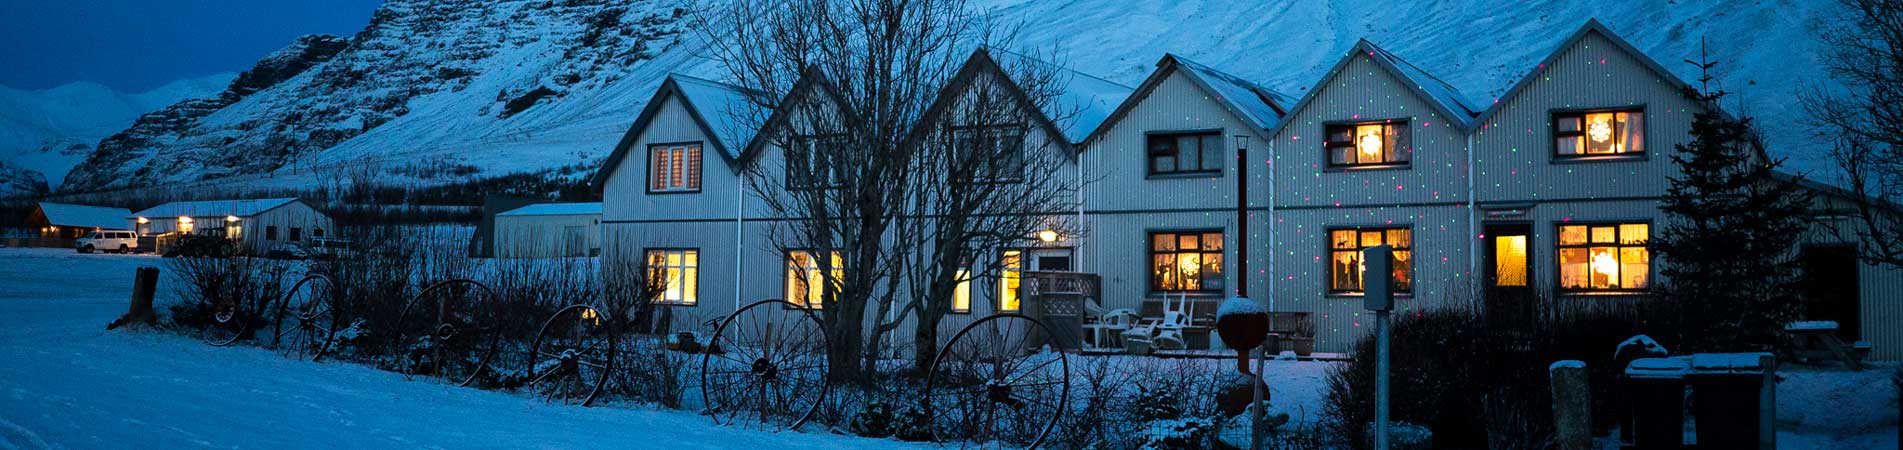 9 Iceland Hotels You Simply Must Experience